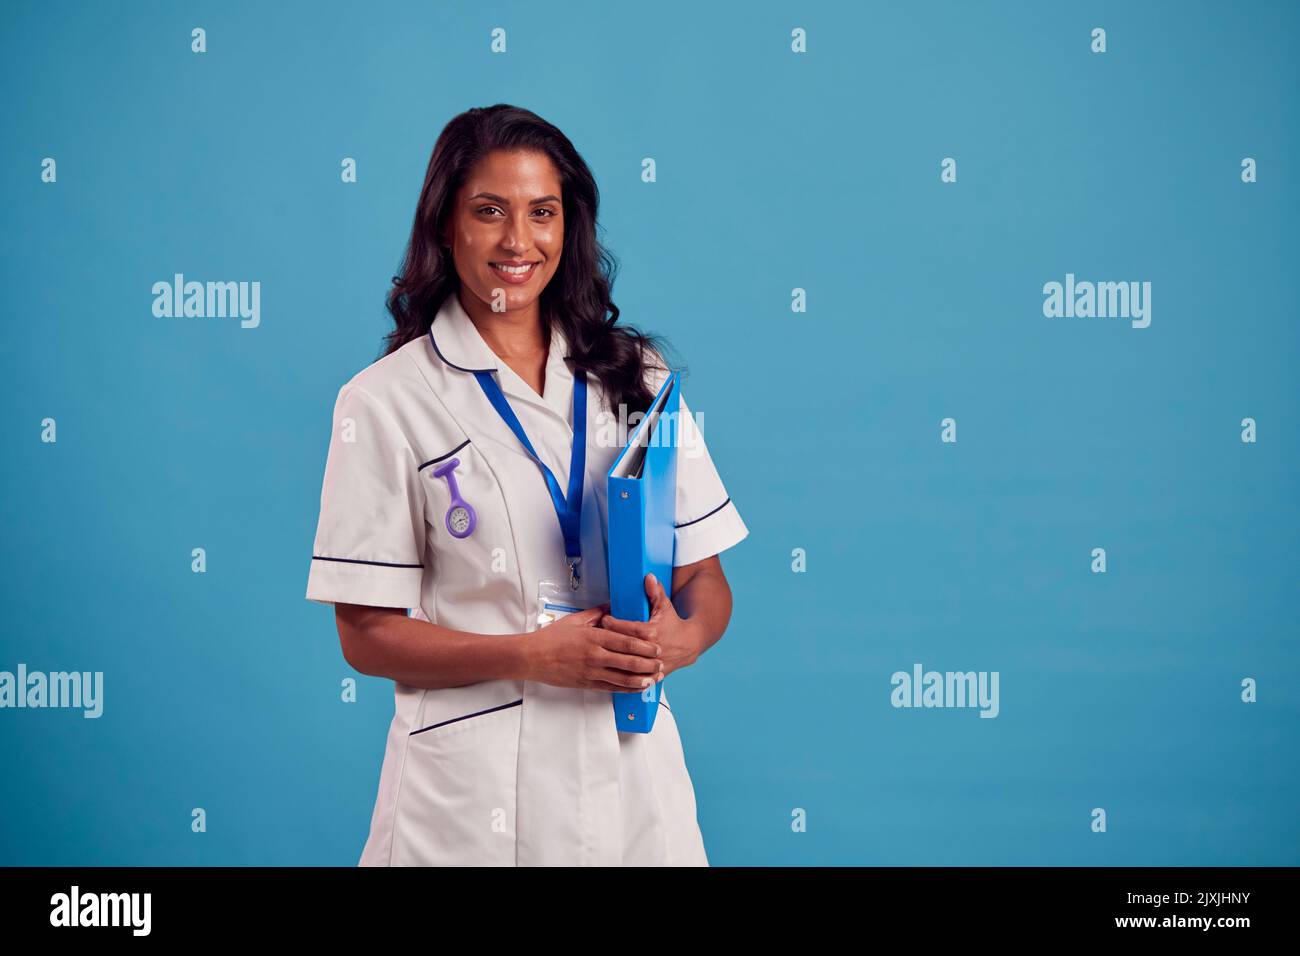 Portrait Of Smiling Female Mature Nurse Wearing Uniform Standing In Front Of Blue Studio Background Stock Photo